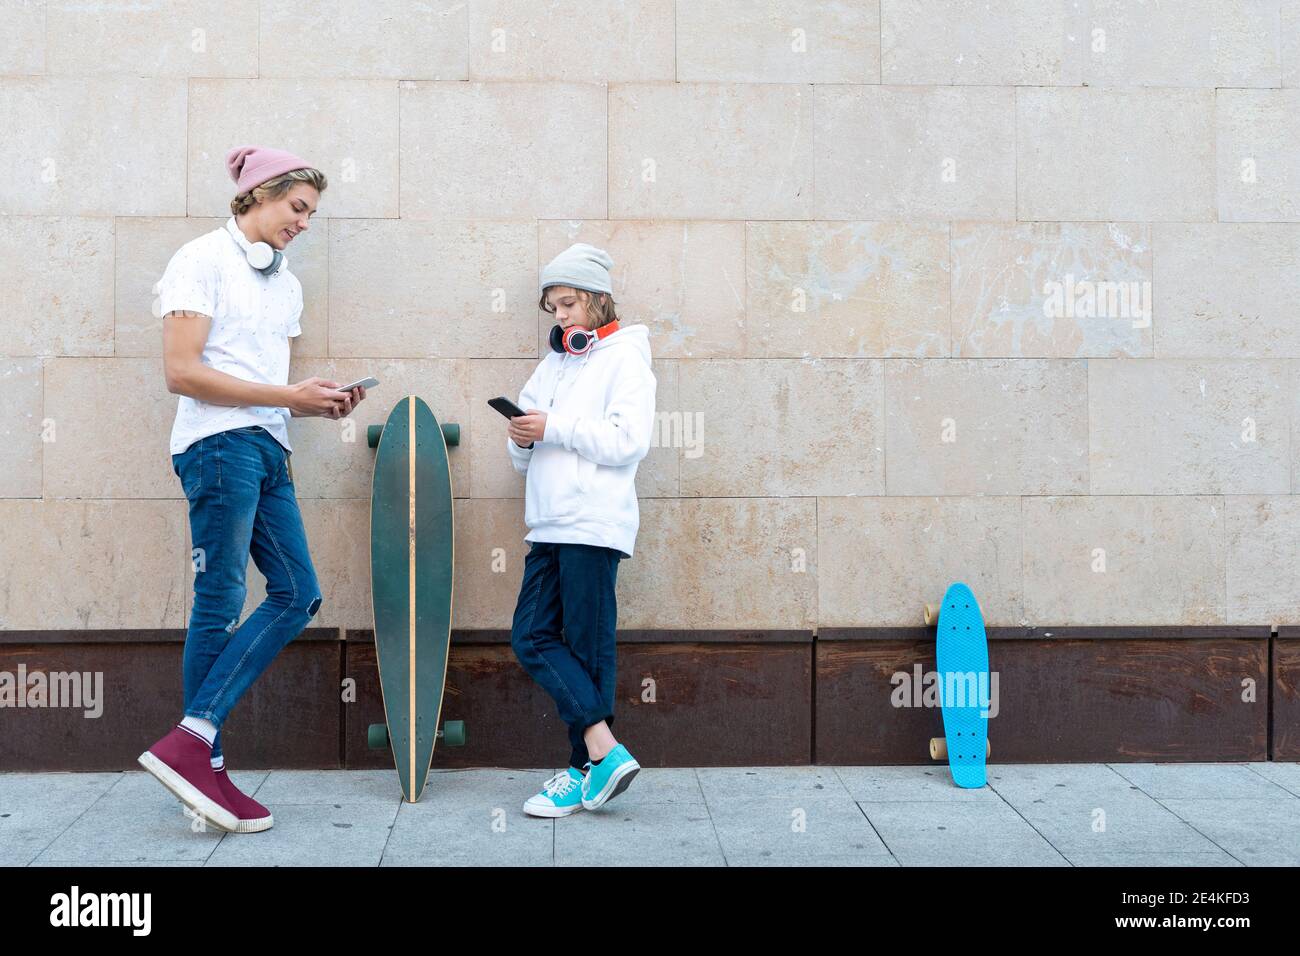 Young man and boy wearing knit hat using mobile phone while standing by skateboard against wall Stock Photo